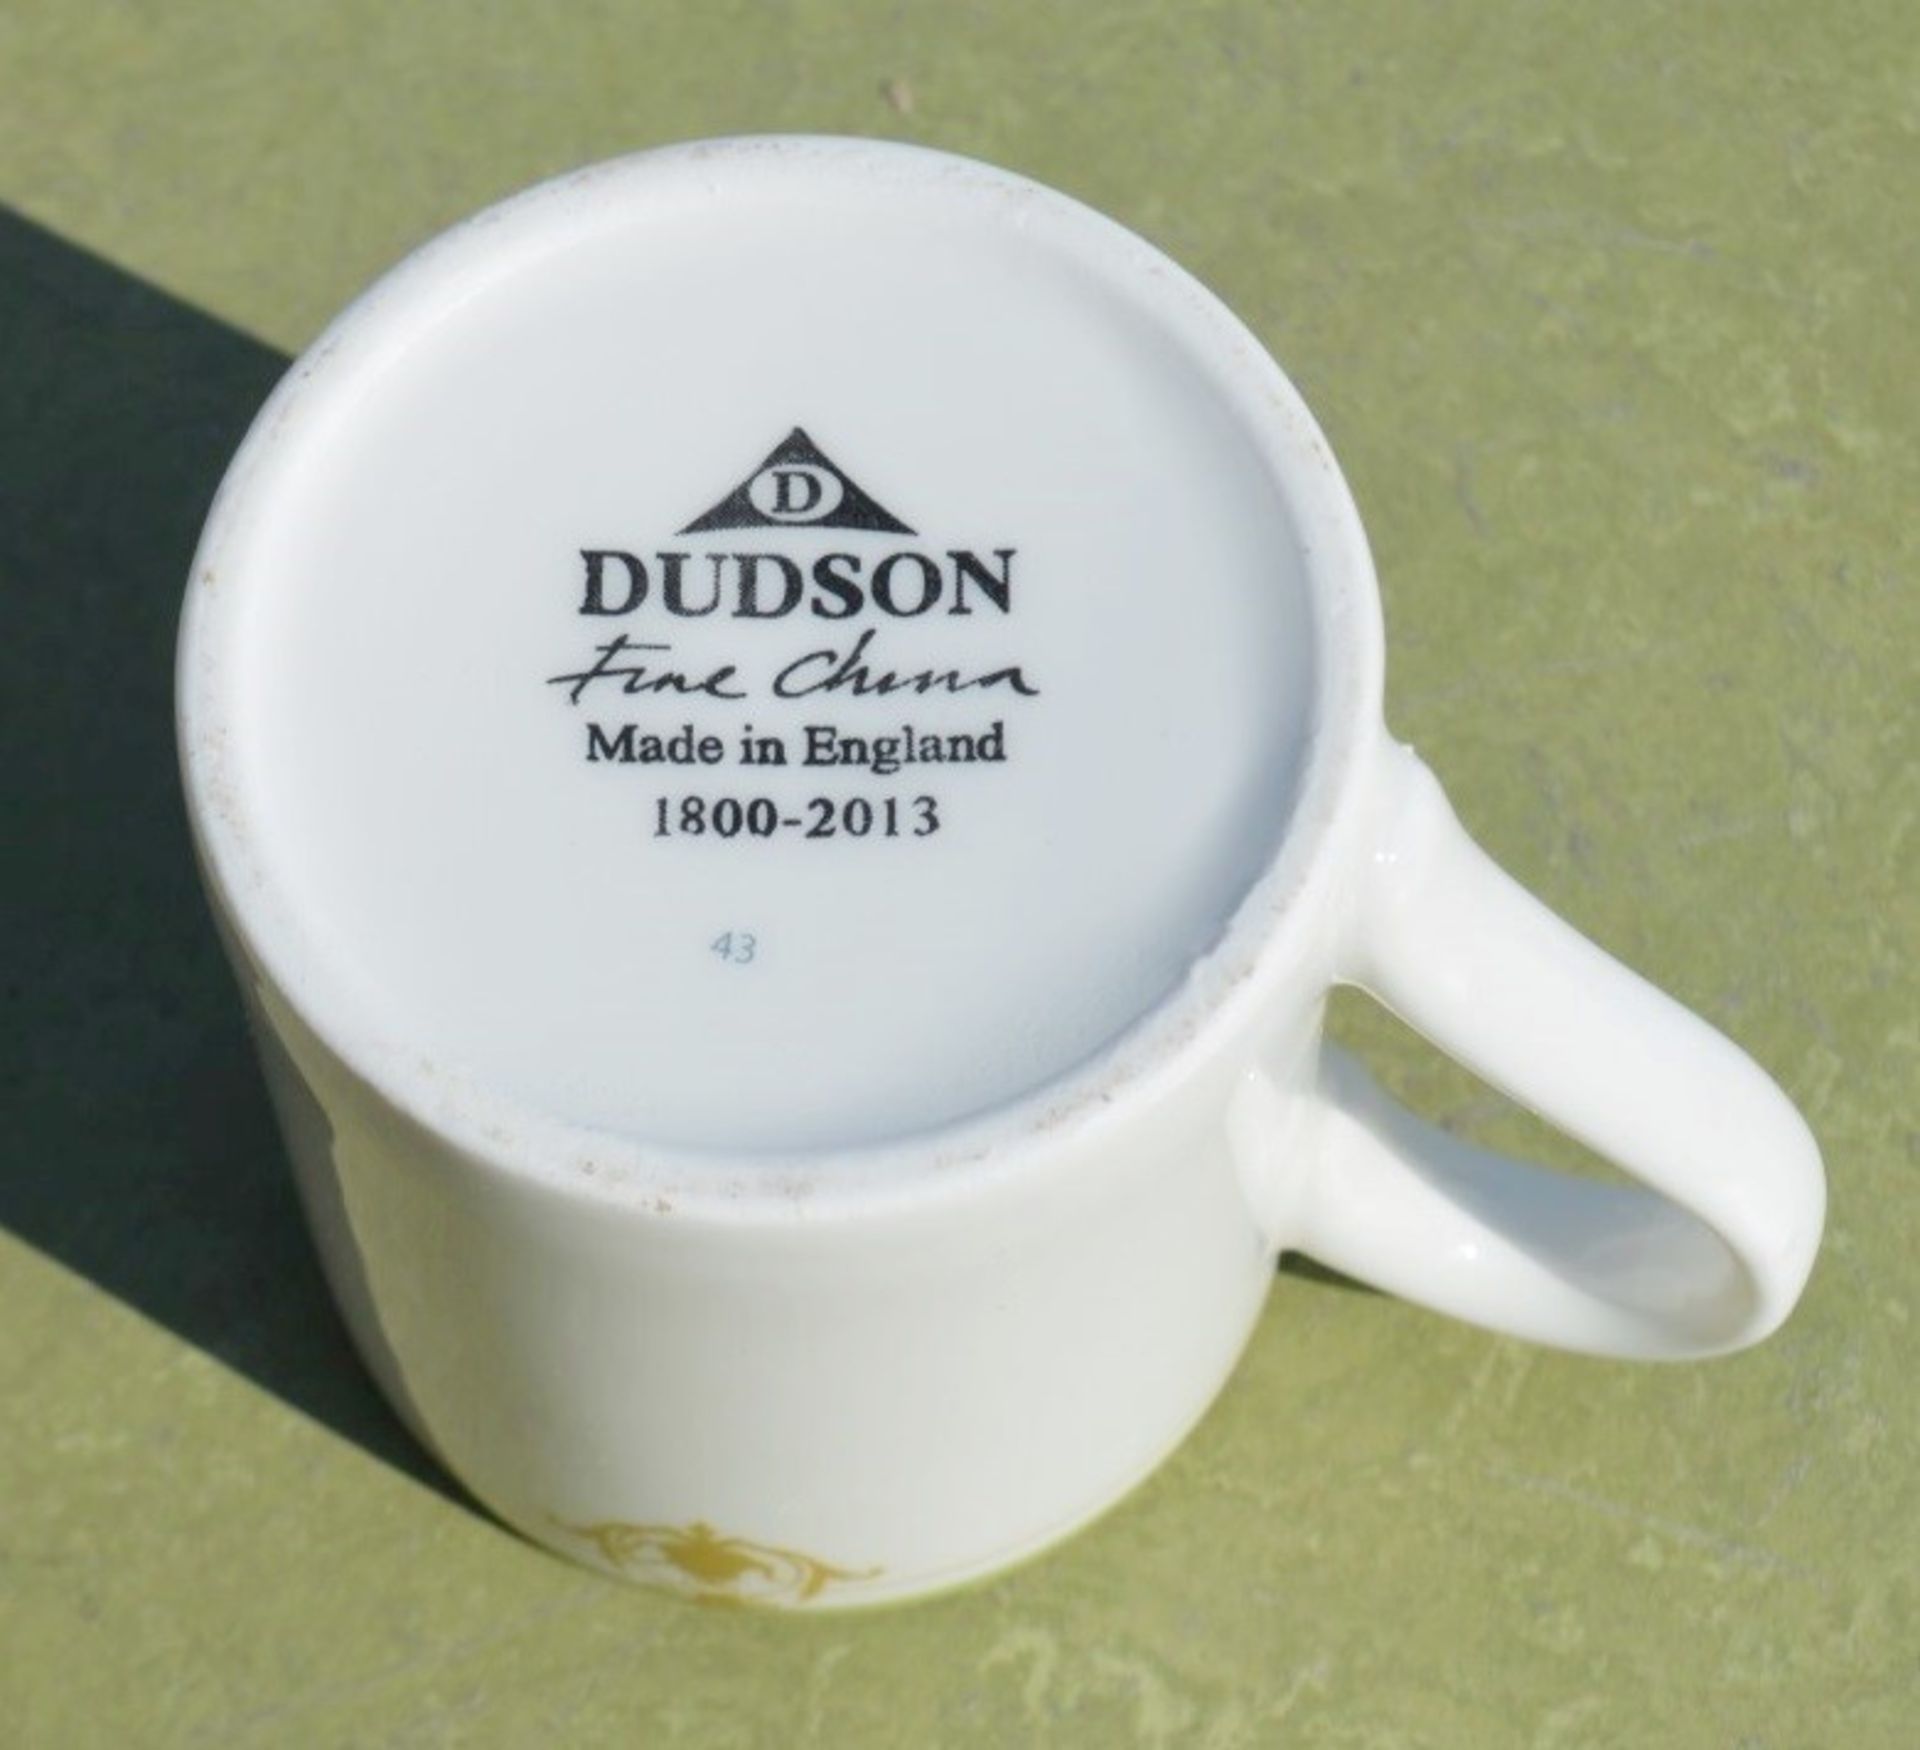 18 x DUDSON Fine China 'Georgian' Espresso Cups with 'Famous Branding' - NEW - Image 3 of 6